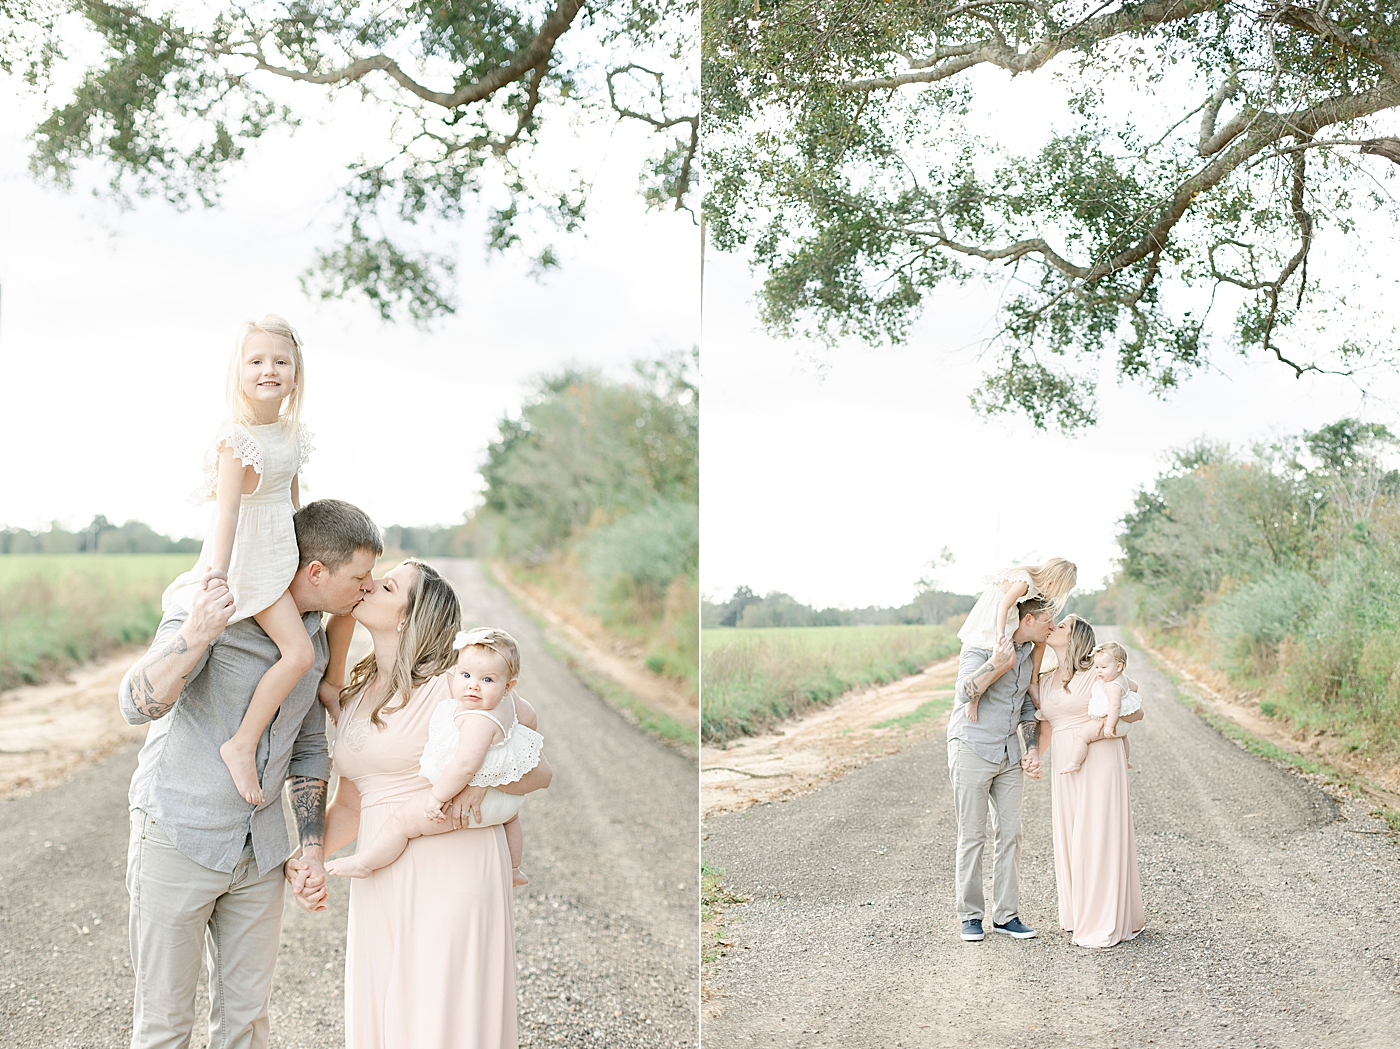 Family interacting while walking a dirt path | Photo by Little Sunshine Photography 